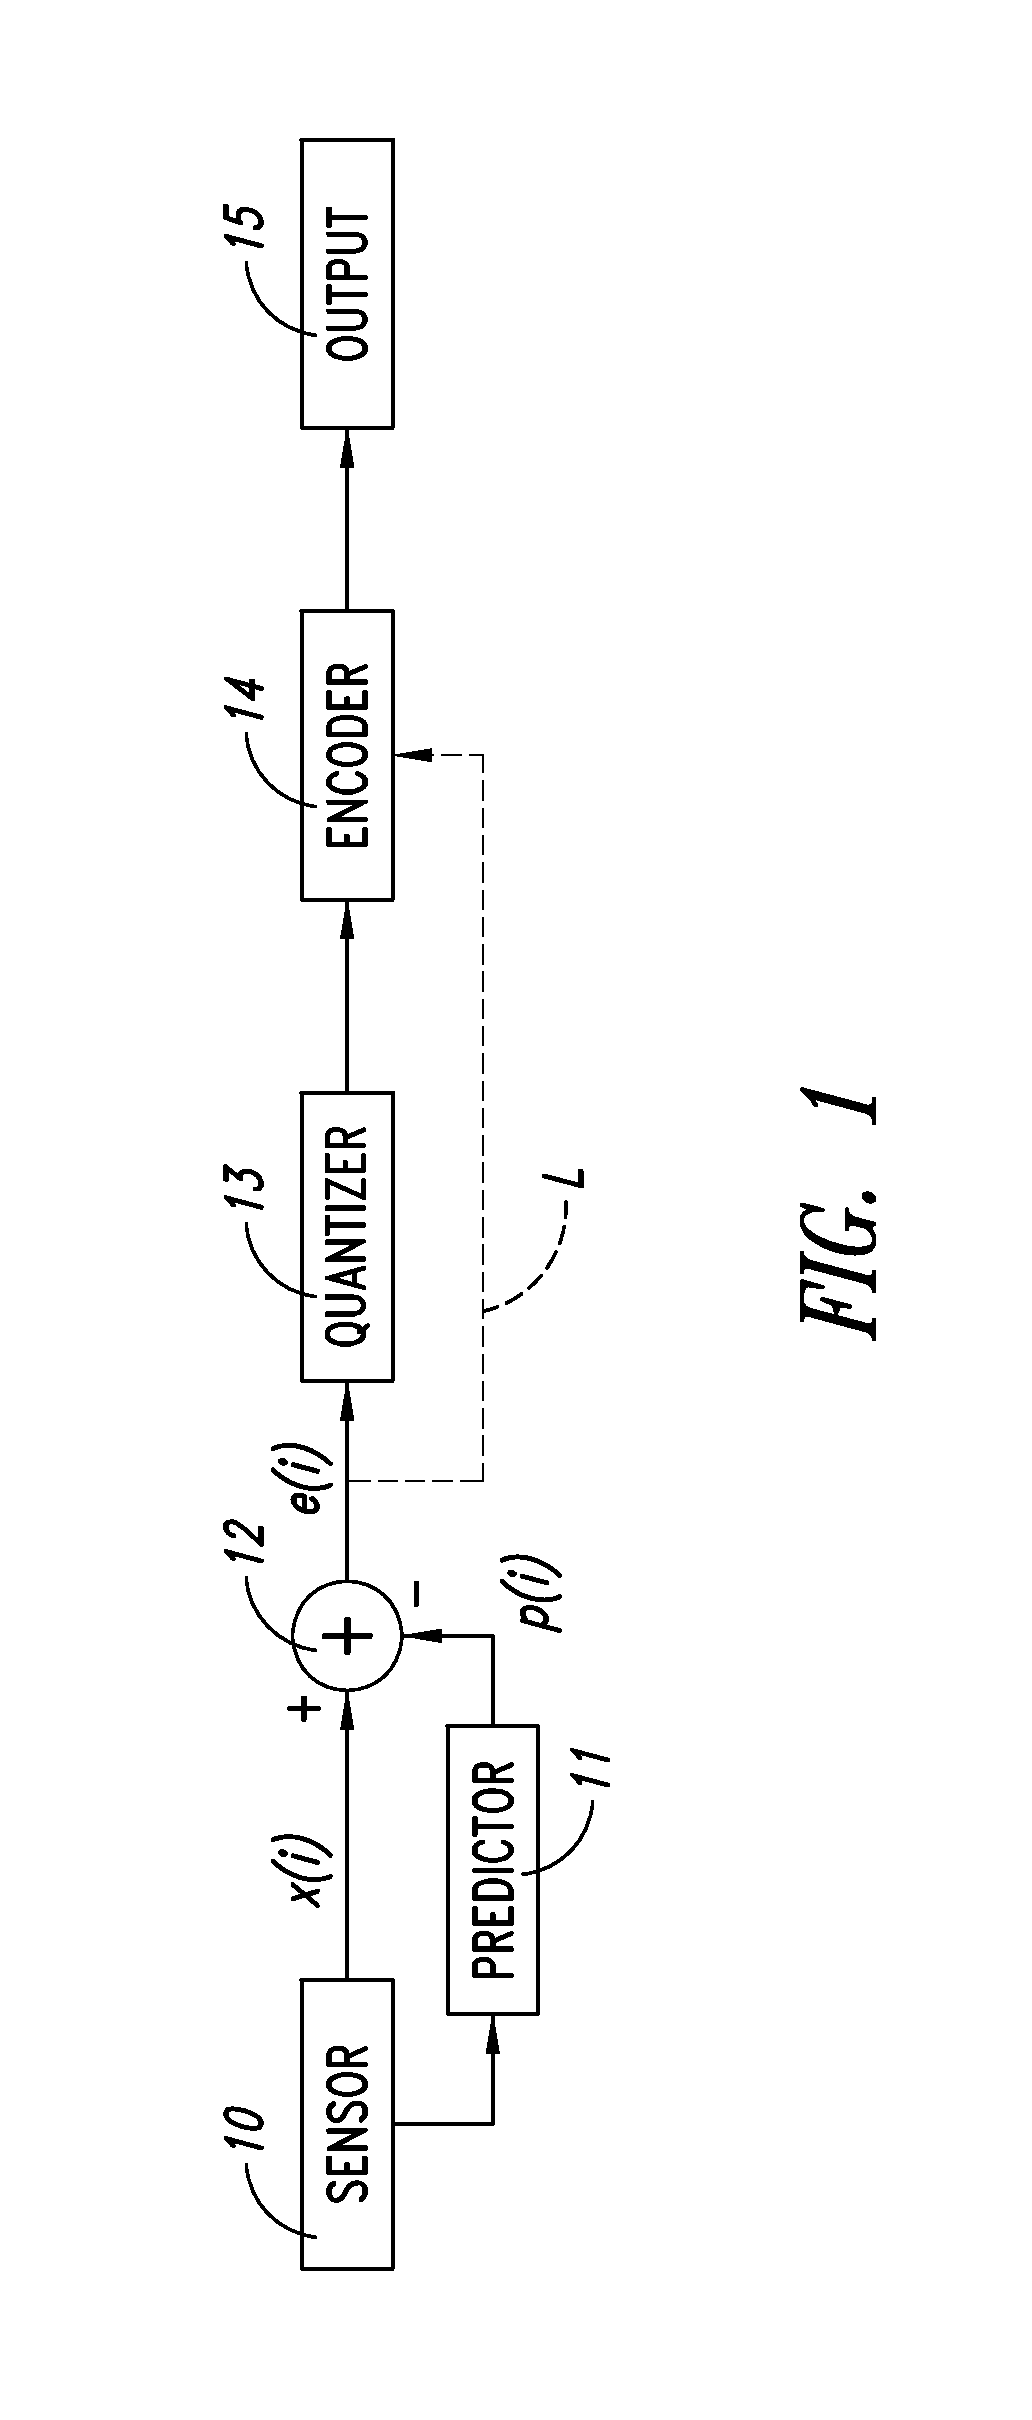 Method and system for processing signals via perceptive vectorial quantization, computer program product therefor